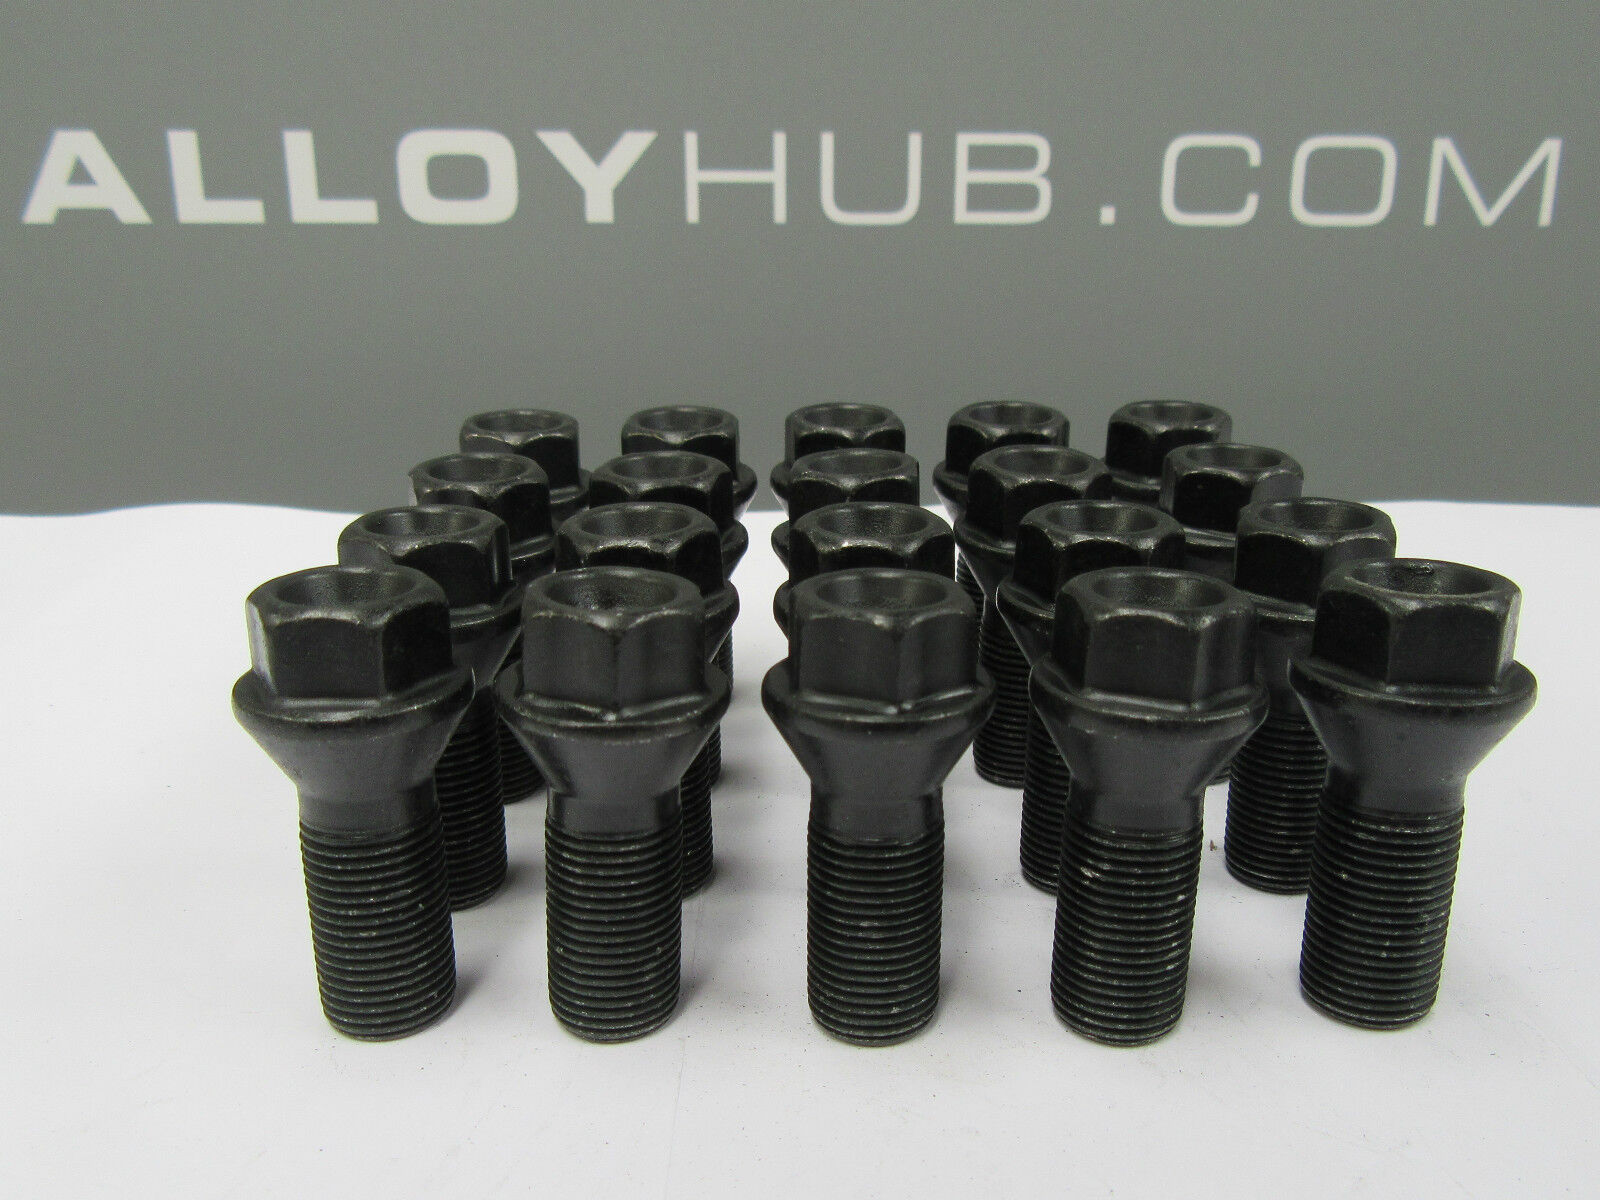 X20 NUTS BRAND NEW BMW 5 SERIES F10/11/18/07 GT BLACK COATED ALLOY WHEEL BOLTS 